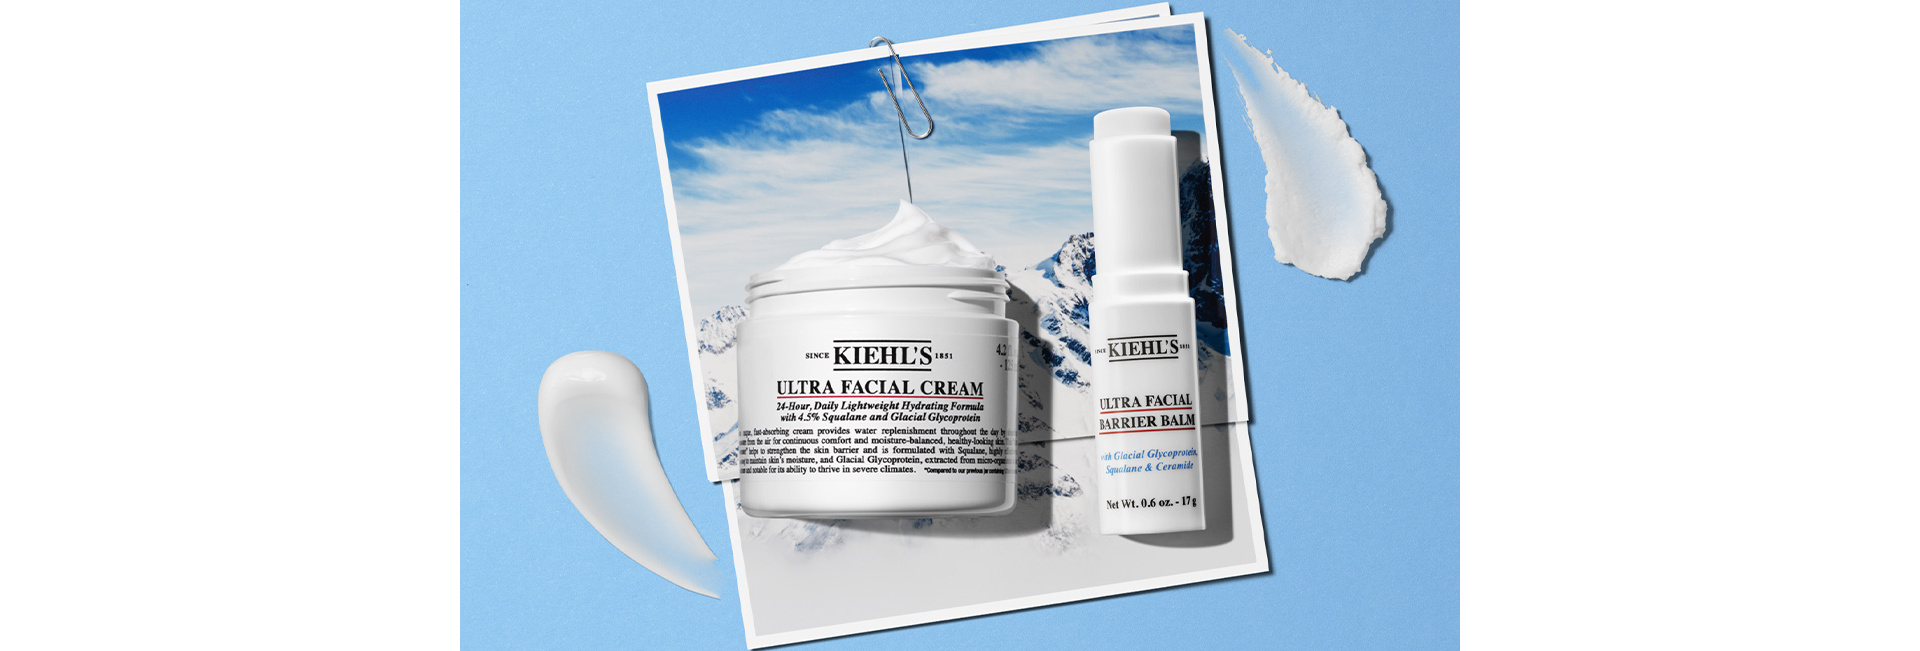 Kiehl's: A multitude of hydrating and replenishing skincare essentials